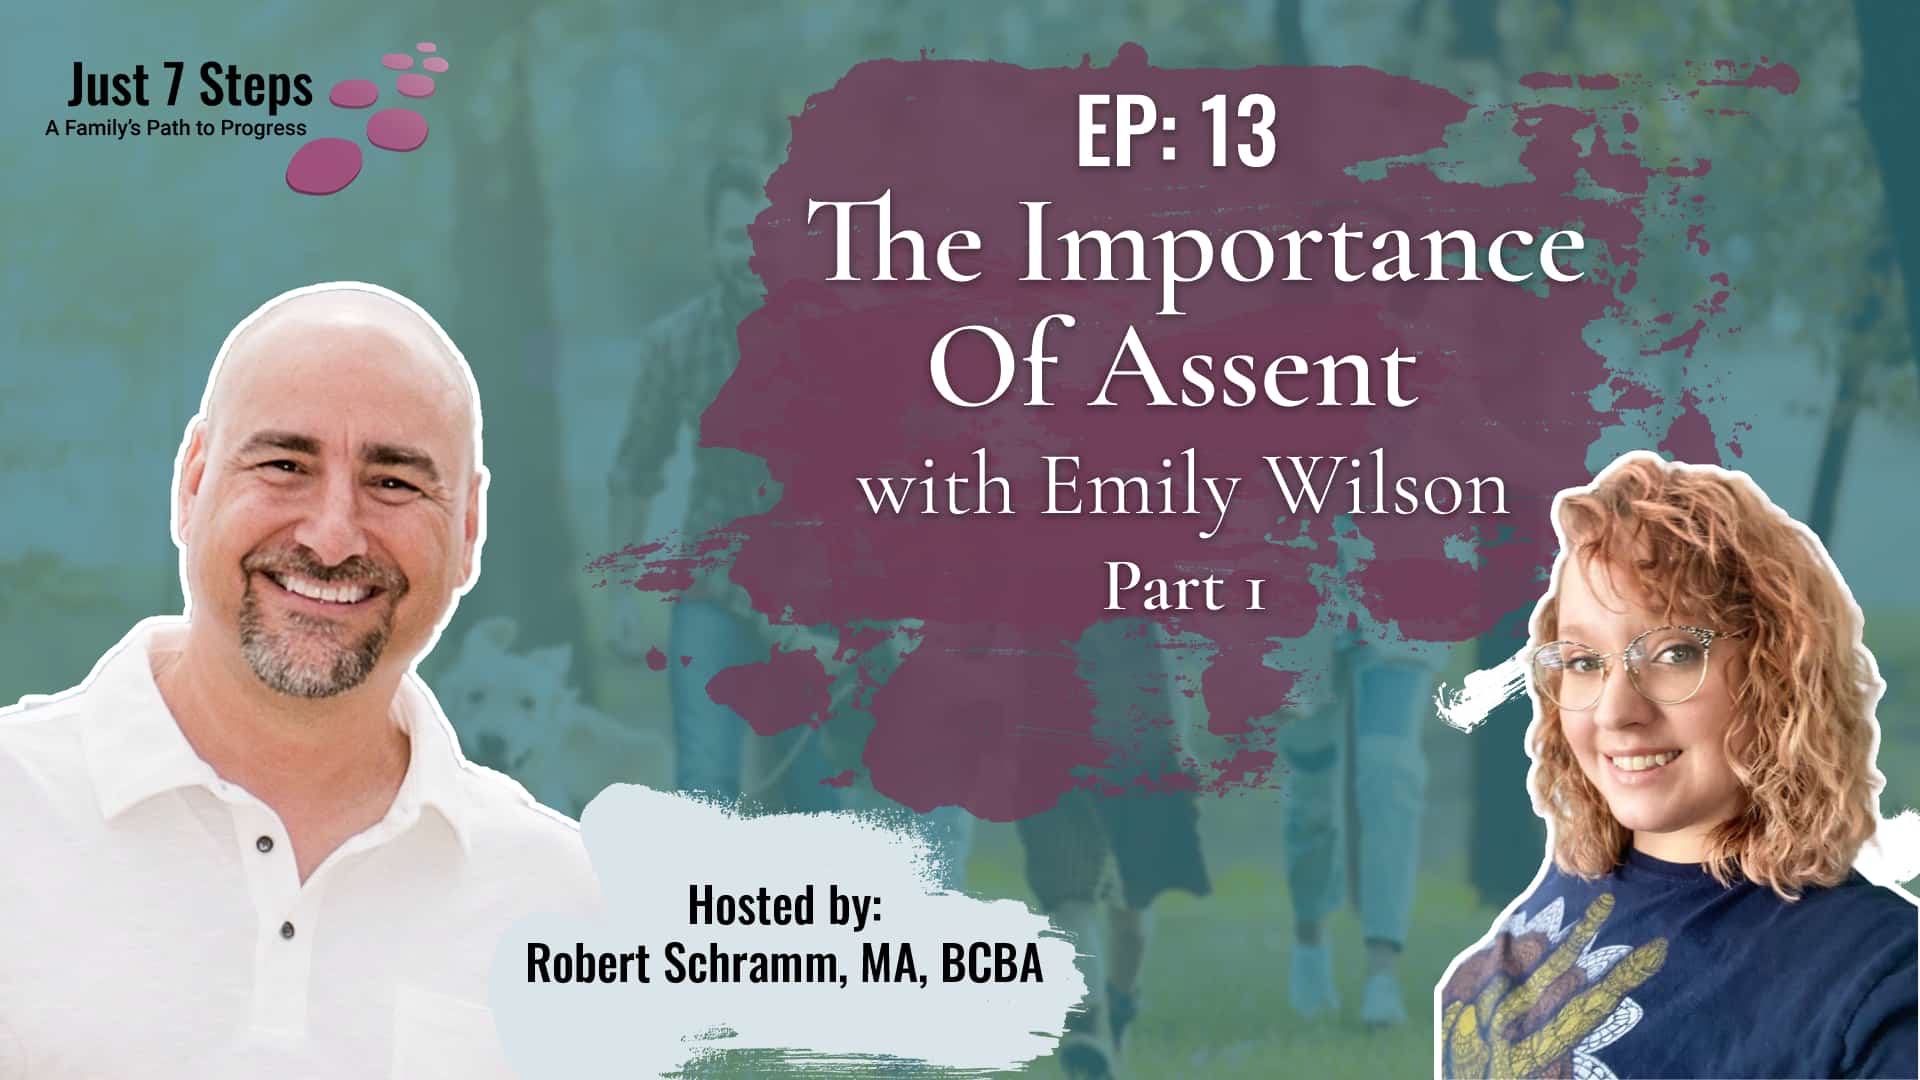 The Importance of Assent Pt. 1 with Emily Wilson